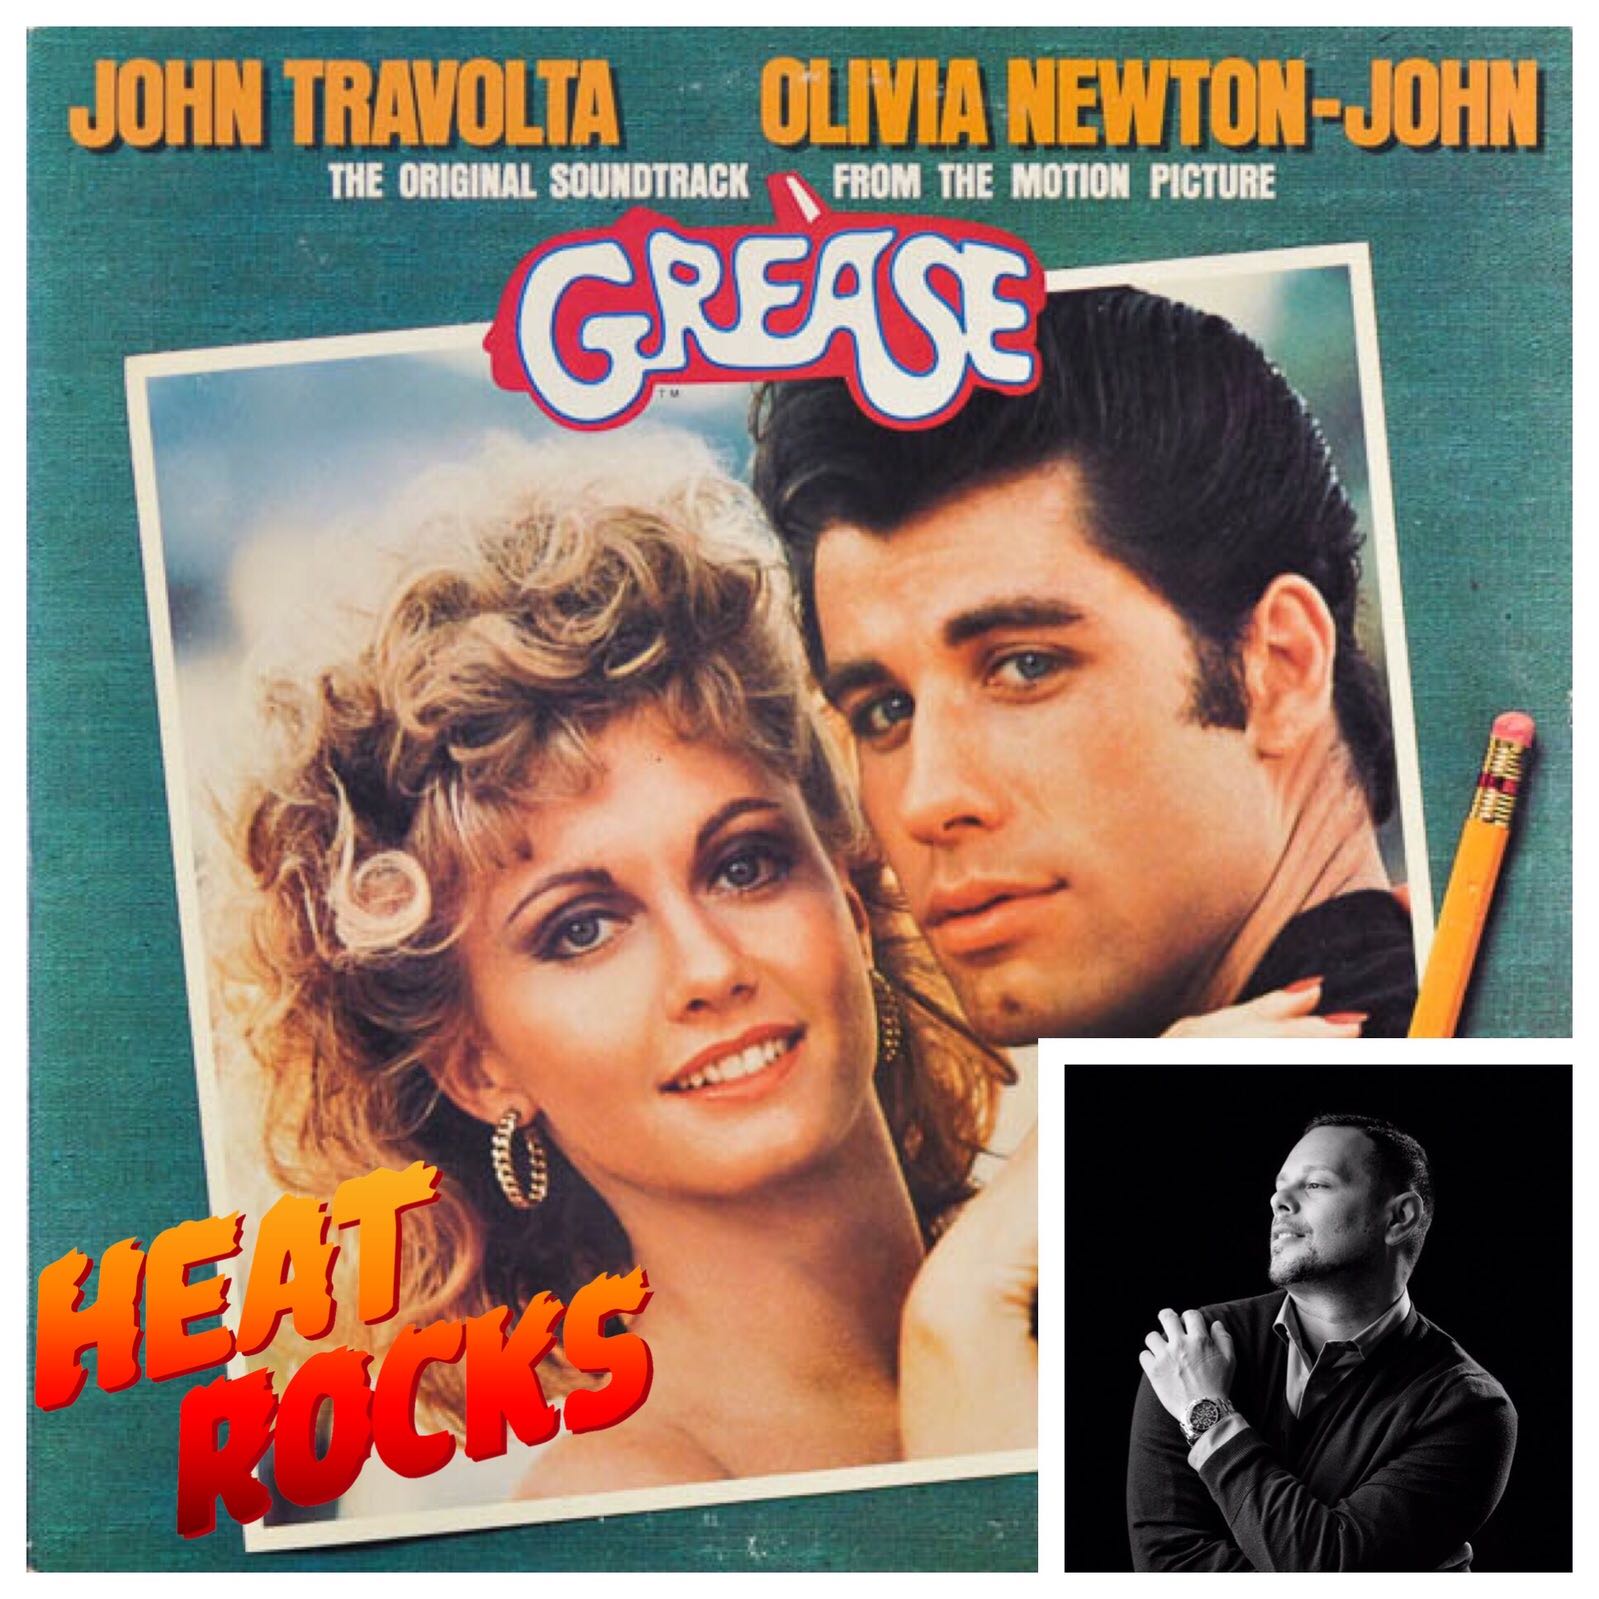 The album art for Grease overlaid with a portrait of Luis Xtravaganza